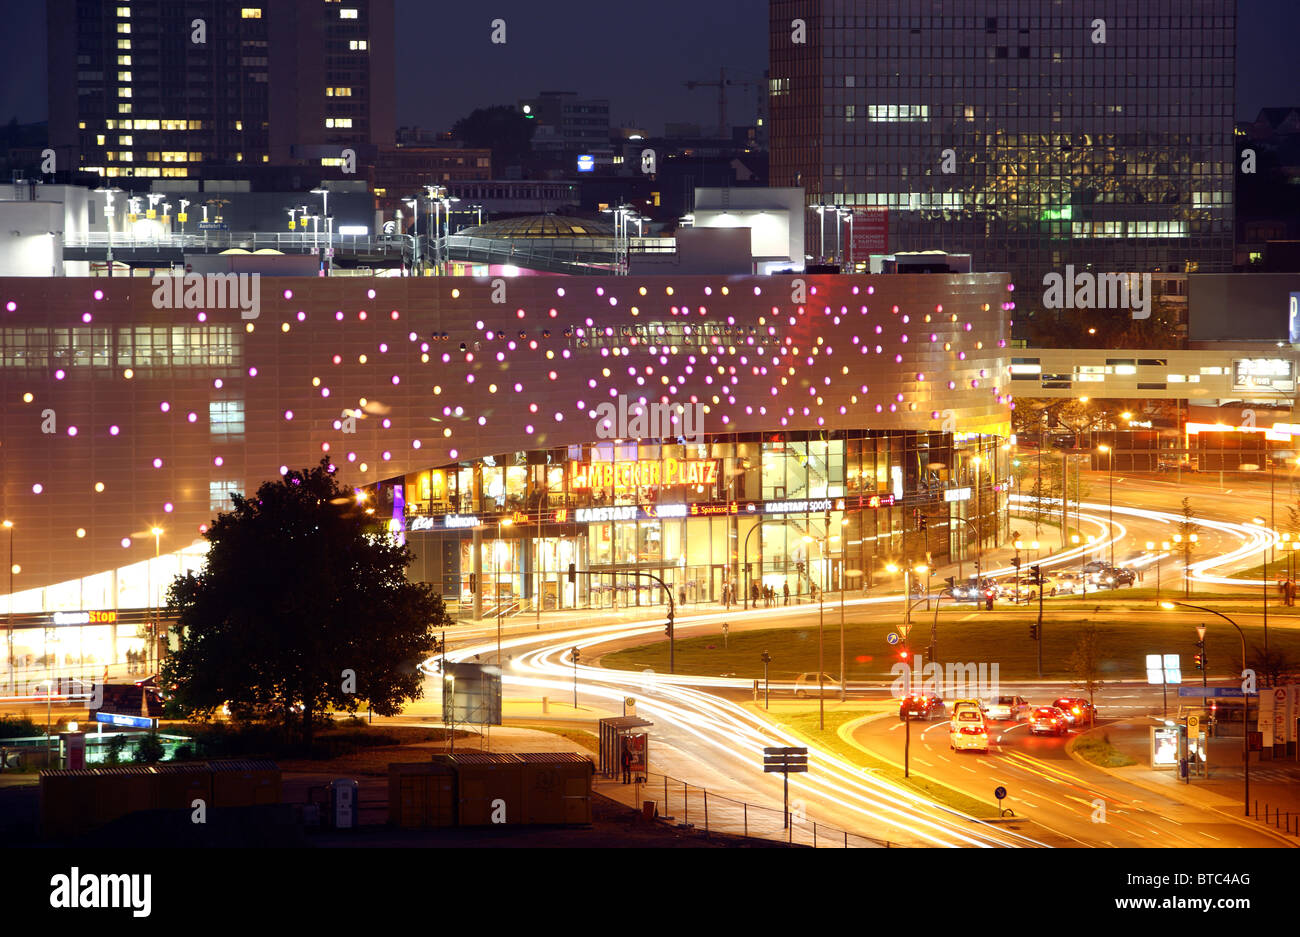 City skyline of Essen, Germany, at night. Shopping mall 'Limbecker Platz' in the city center. Business district. Stock Photo